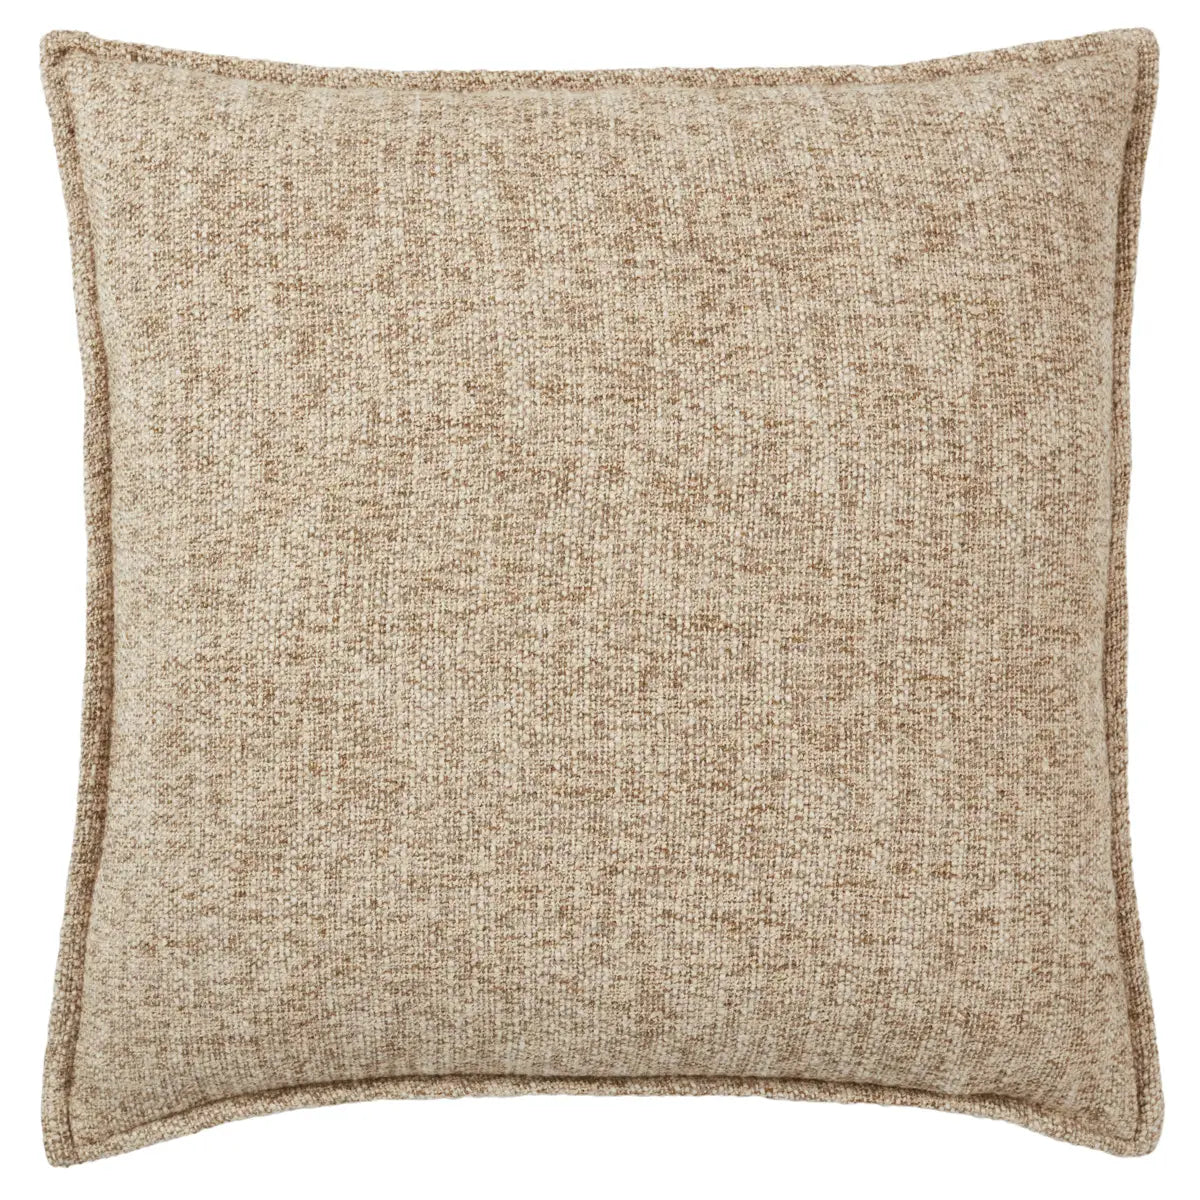 The Tanzy Enya Pillow boasts an assortment of earthy tones and simple patterns for cozy, inviting looks that complement any style. The reversible Enya throw pillow features a solid heathered pattern in a contemporary light brown and cream colorway.  Amethyst Home provides interior design services, furniture, rugs, and lighting in the Kansas City metro area.